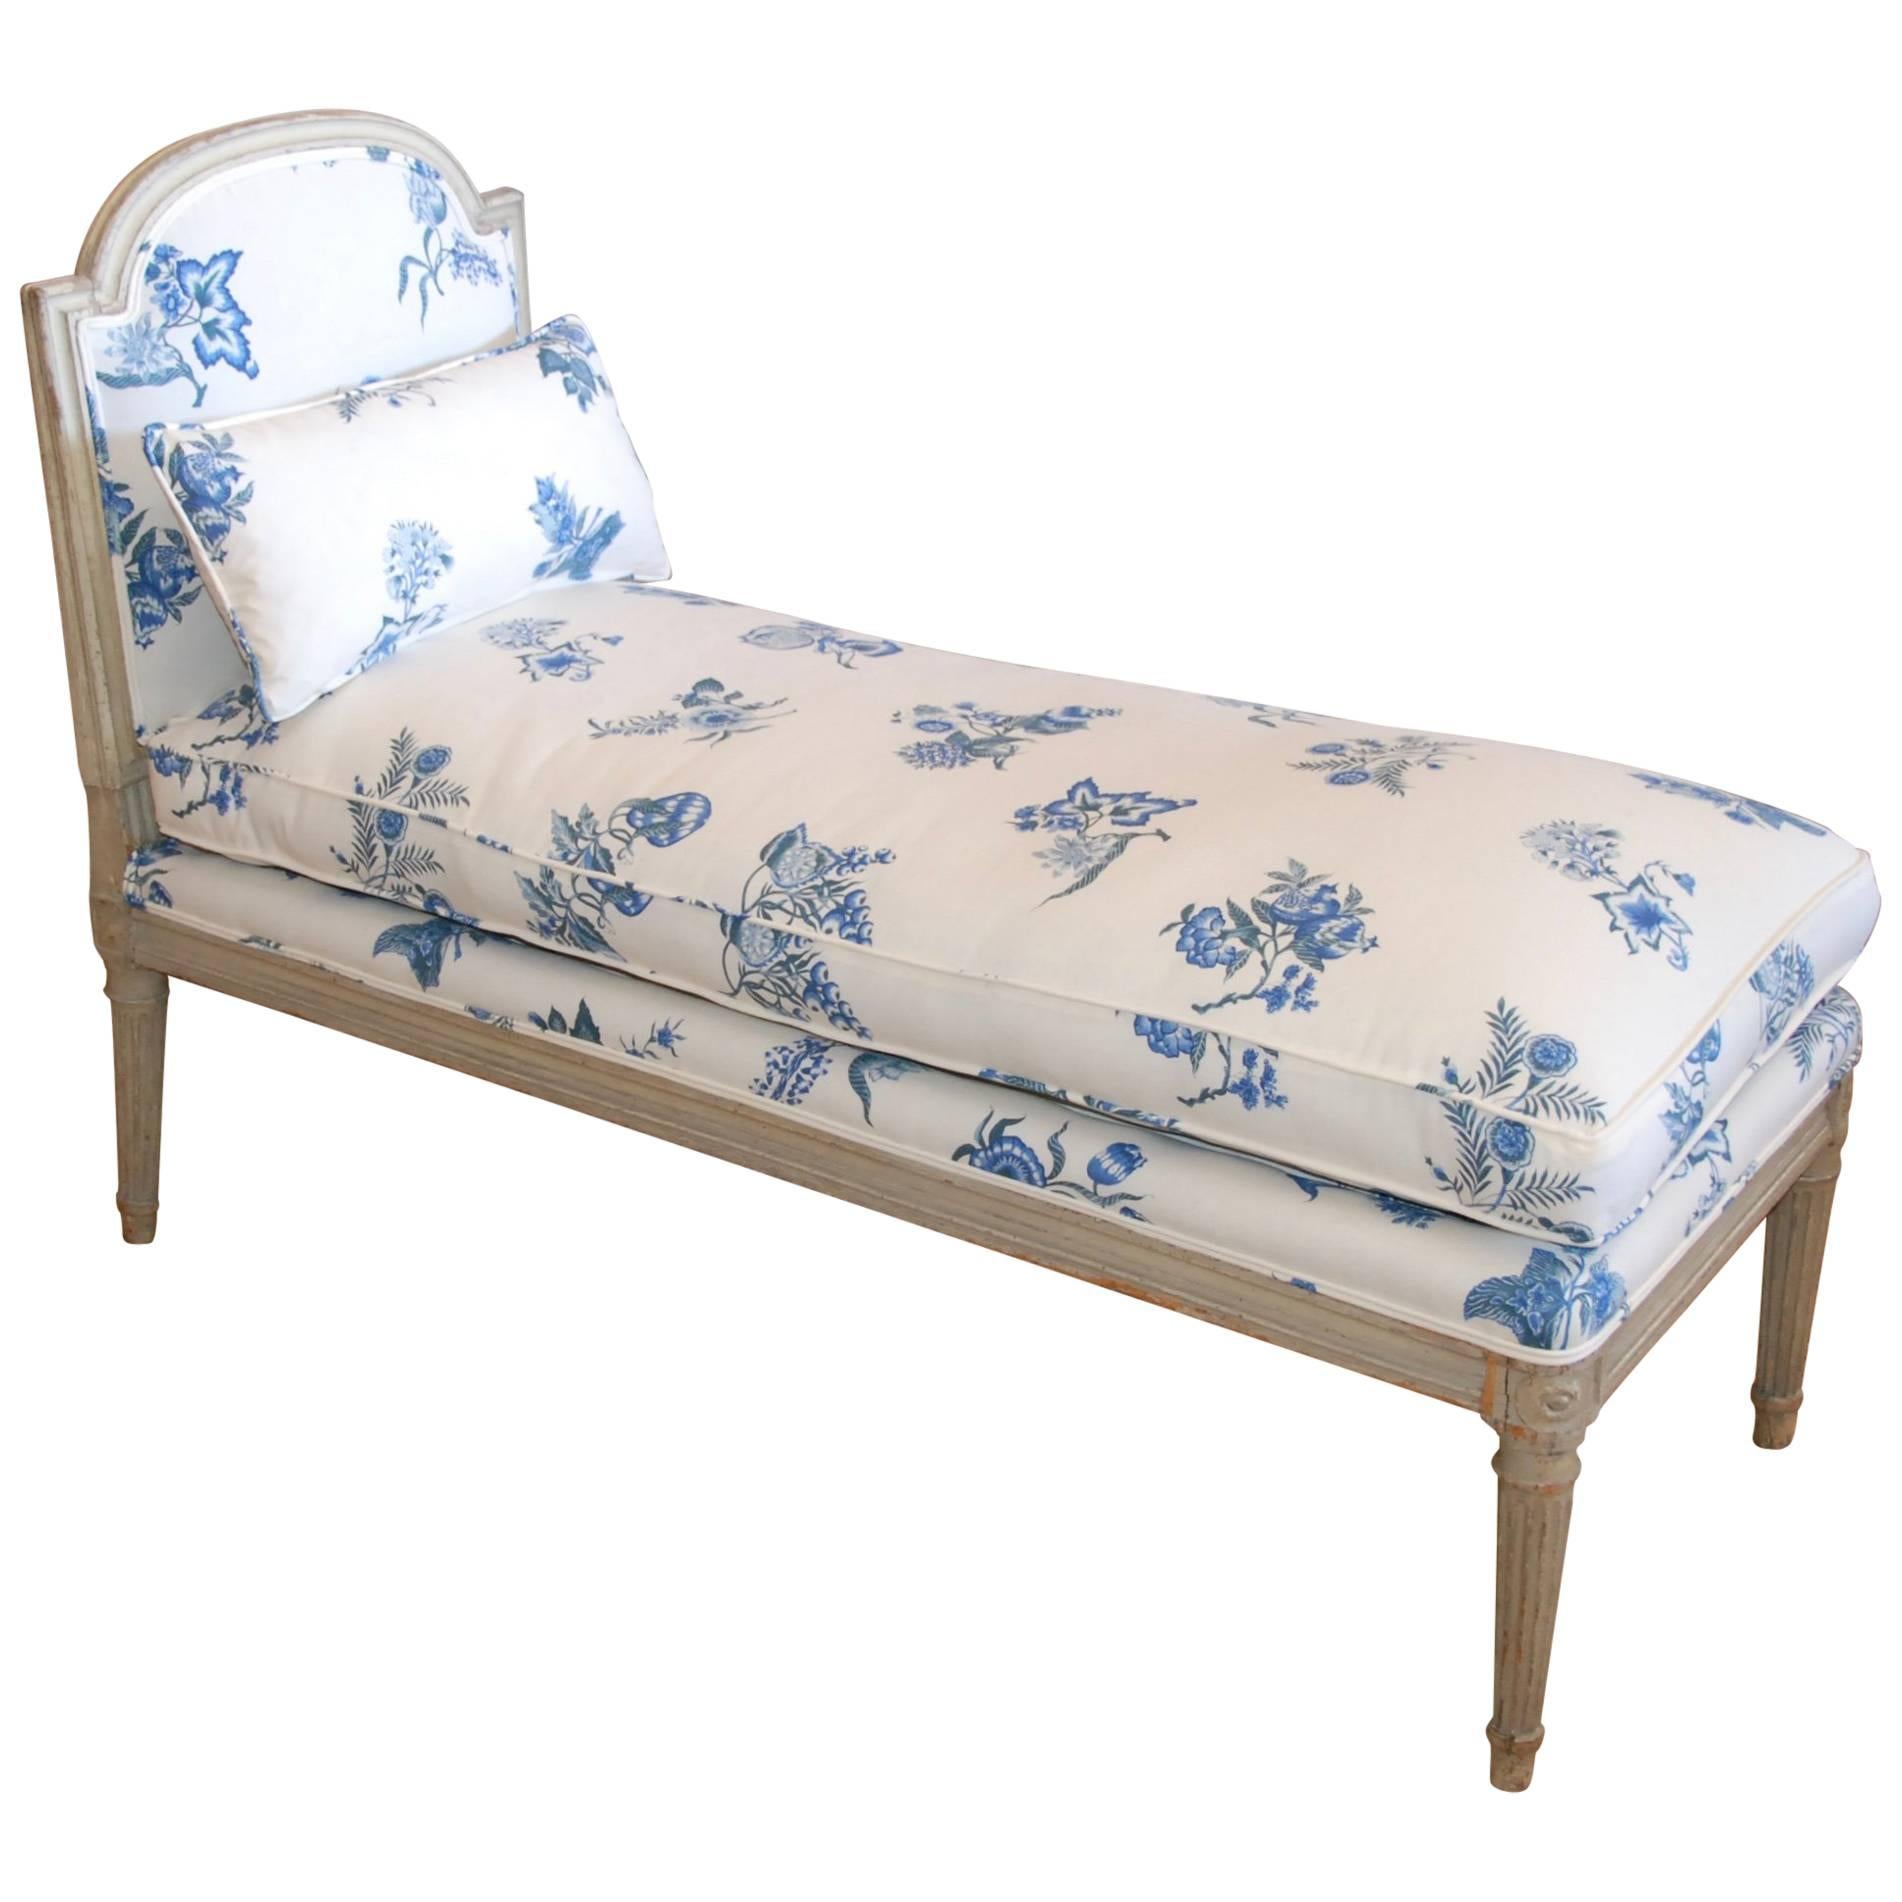 Early 19th Century French Painted Chaise